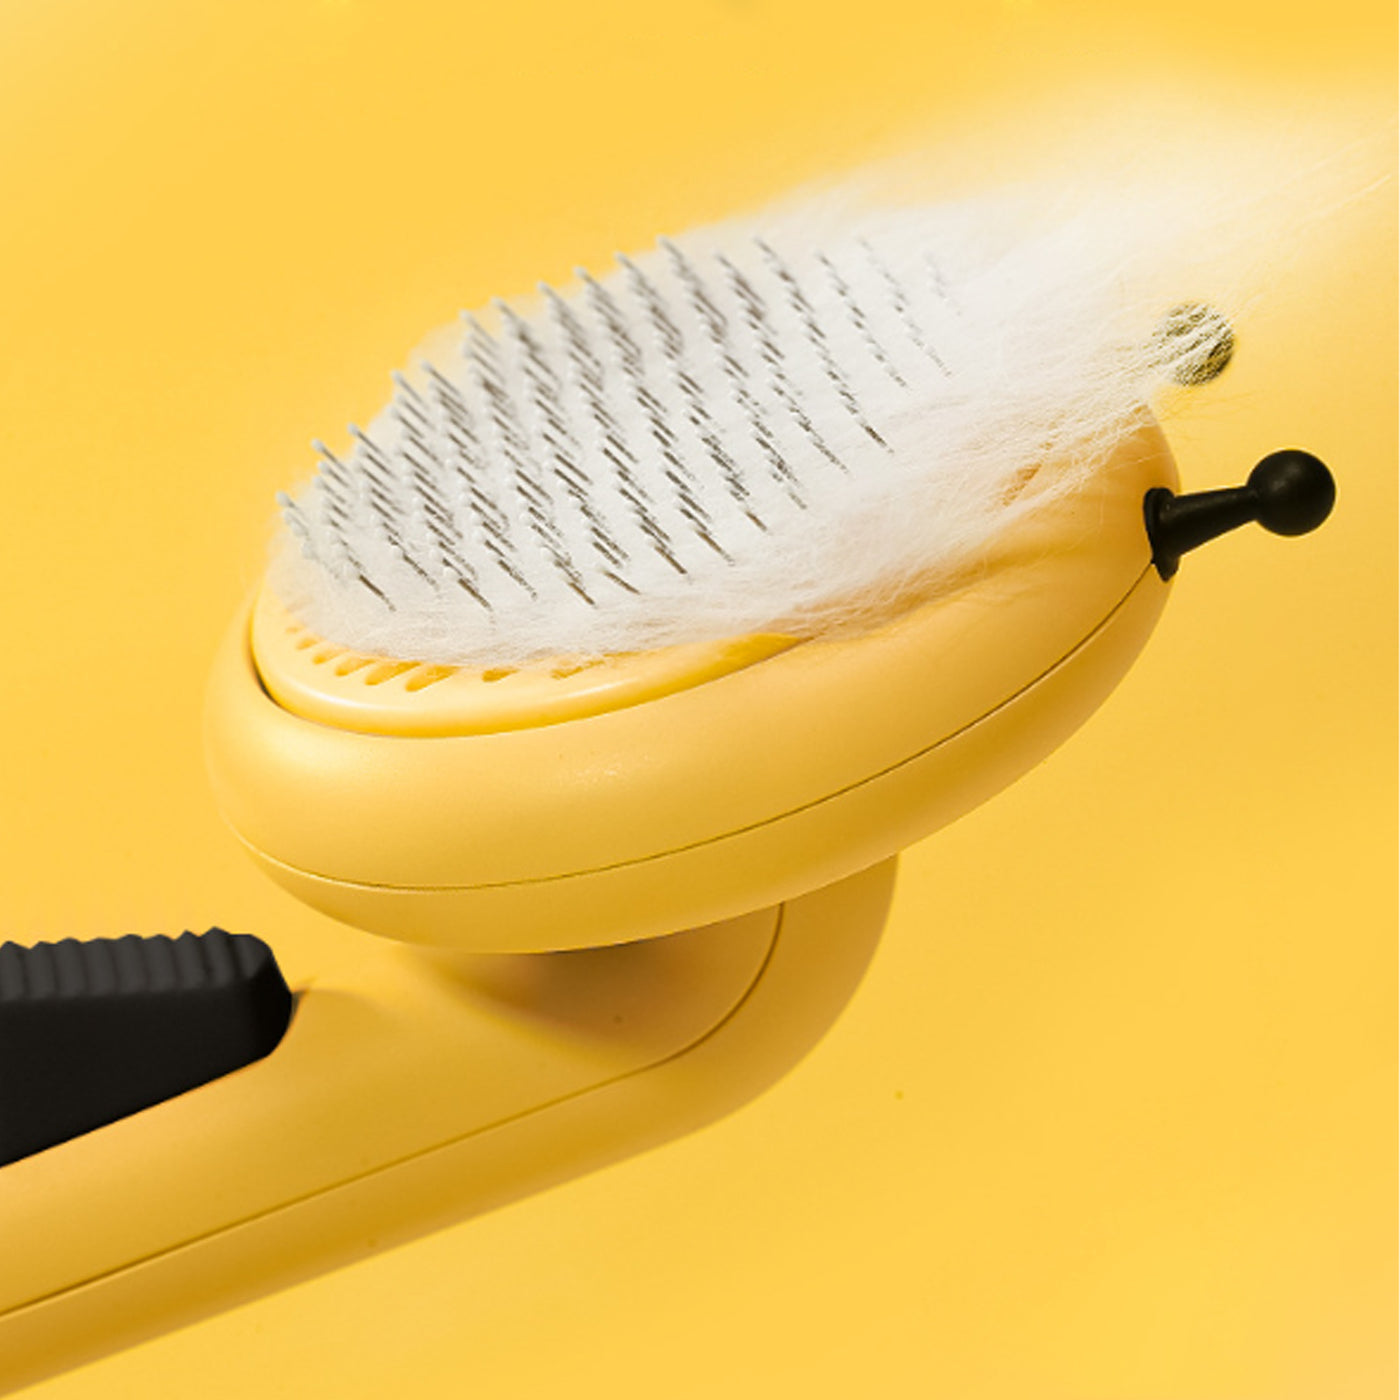 Little Bee Pet Comb (Dogs & Cats) - Removes Hair, Gentle Grooming